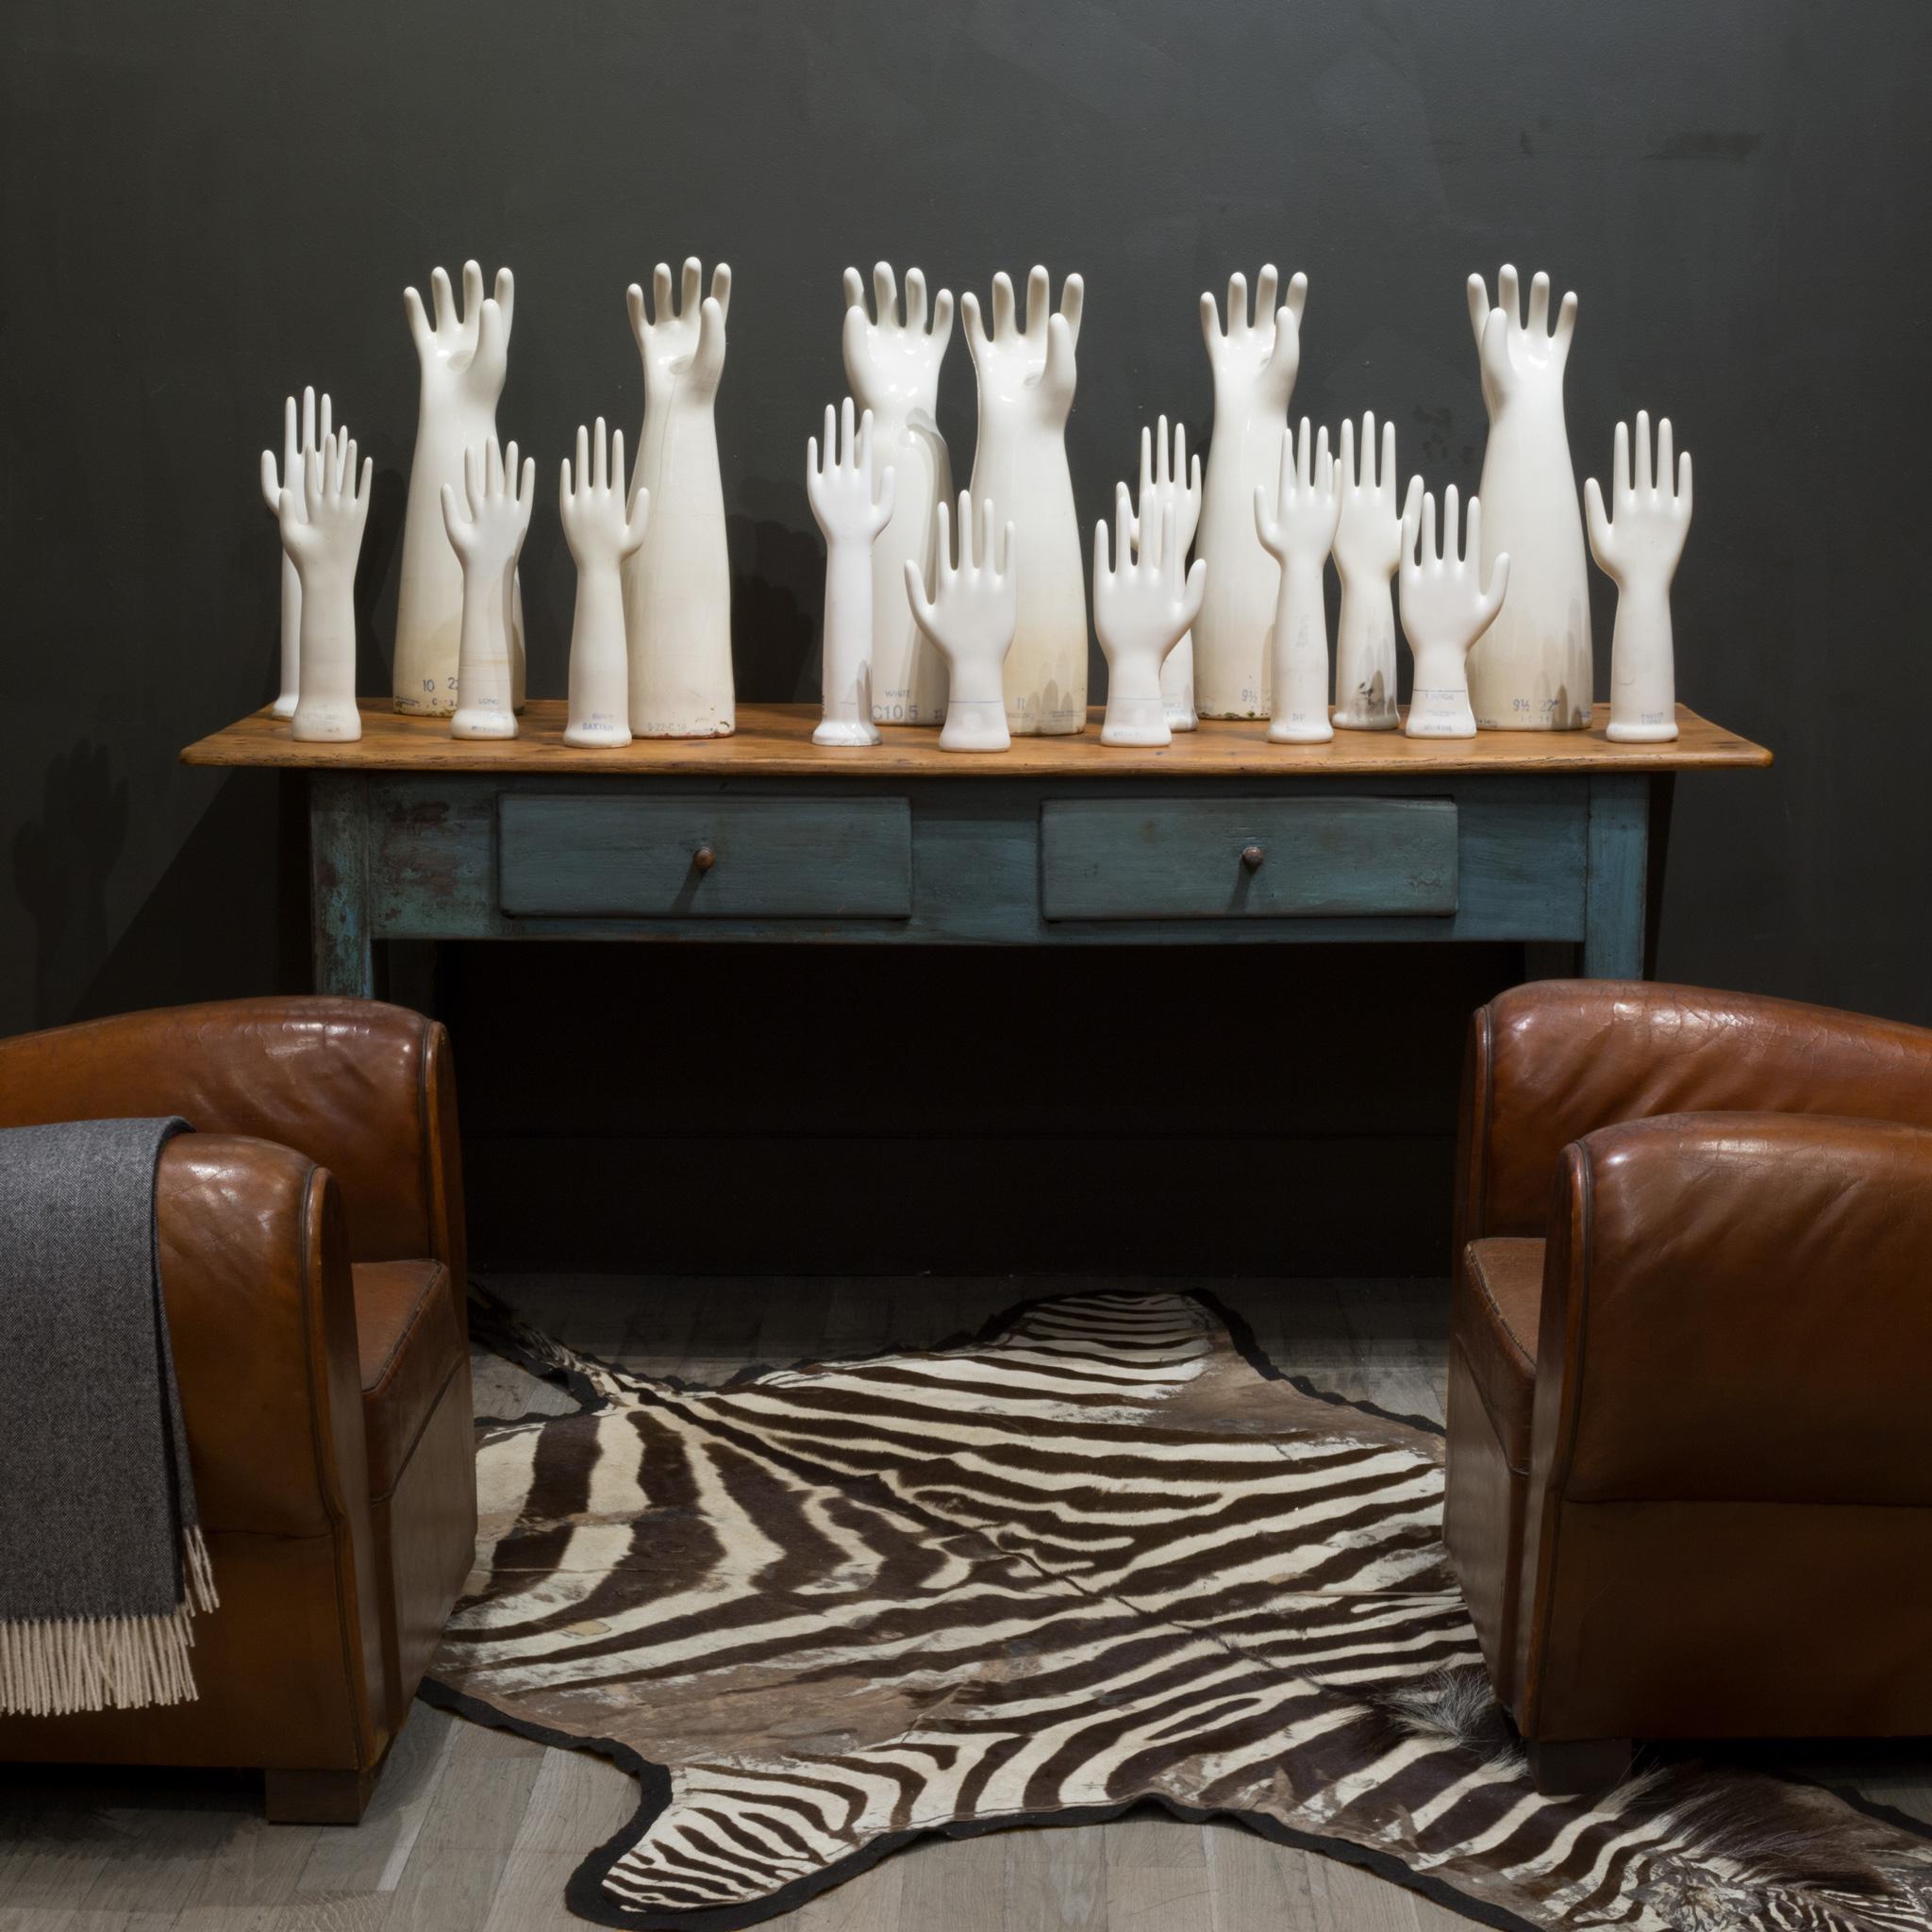 About

Several sizes available. See S16 Home San Francisco. 

Original vintage glazed porcelain factory rubber glove molds. Each is stamped with the size and exact dates of manufacture. These pieces have retained their original